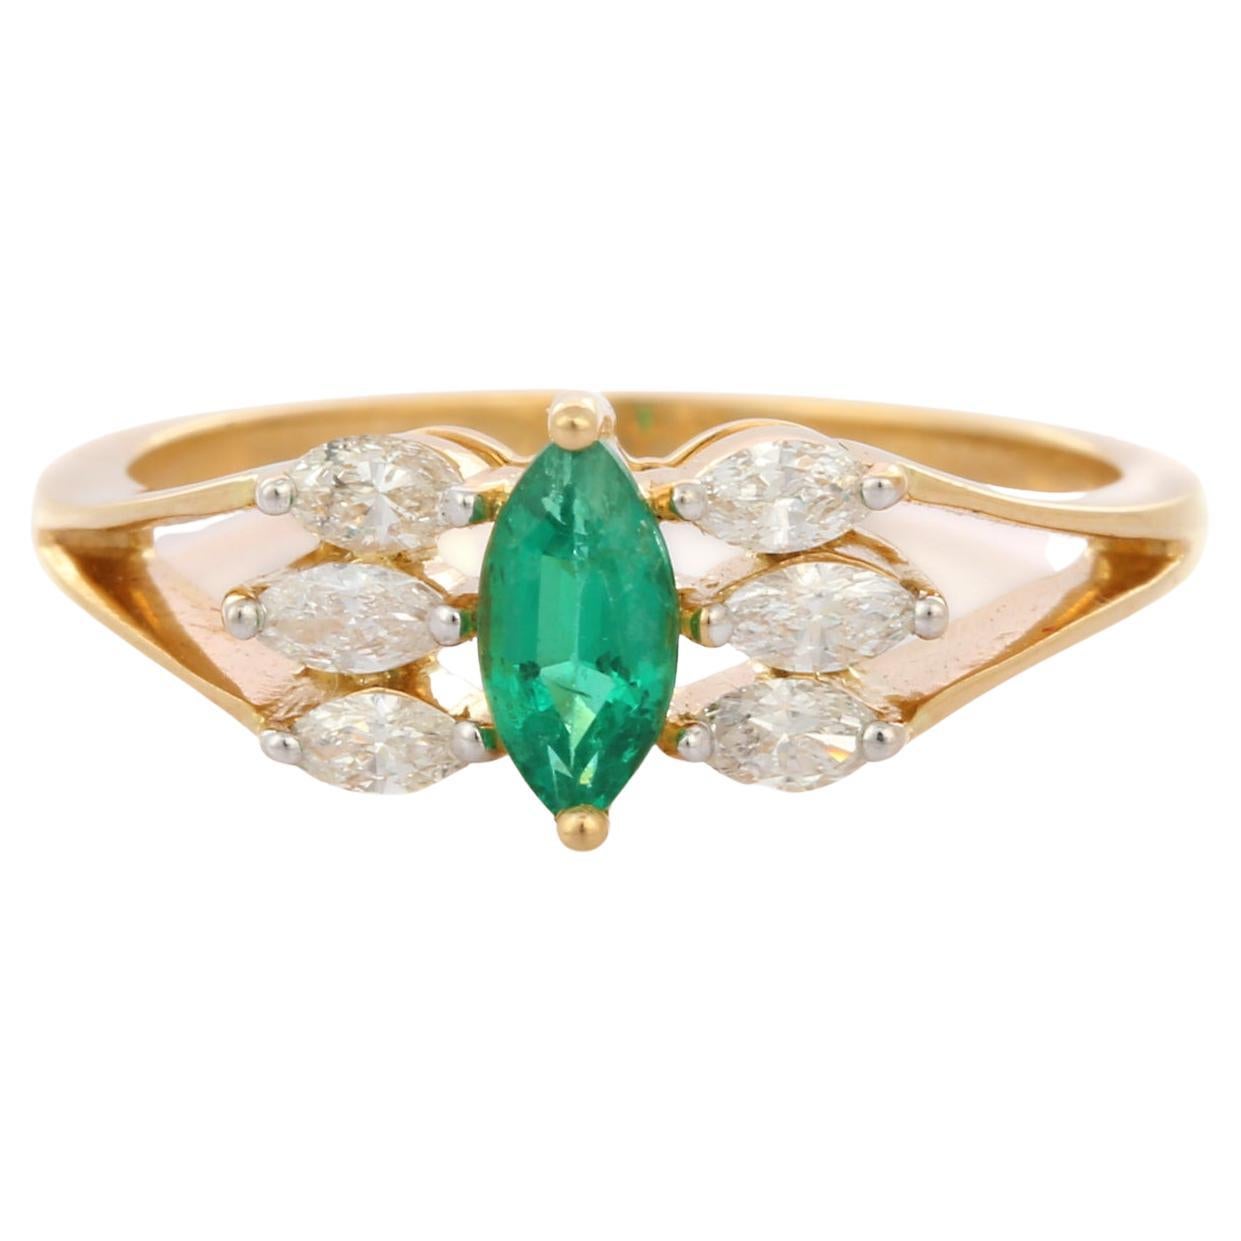 For Sale:  Startling Emerald and Diamond Designer Engagement Ring in 18K Solid Yellow Gold